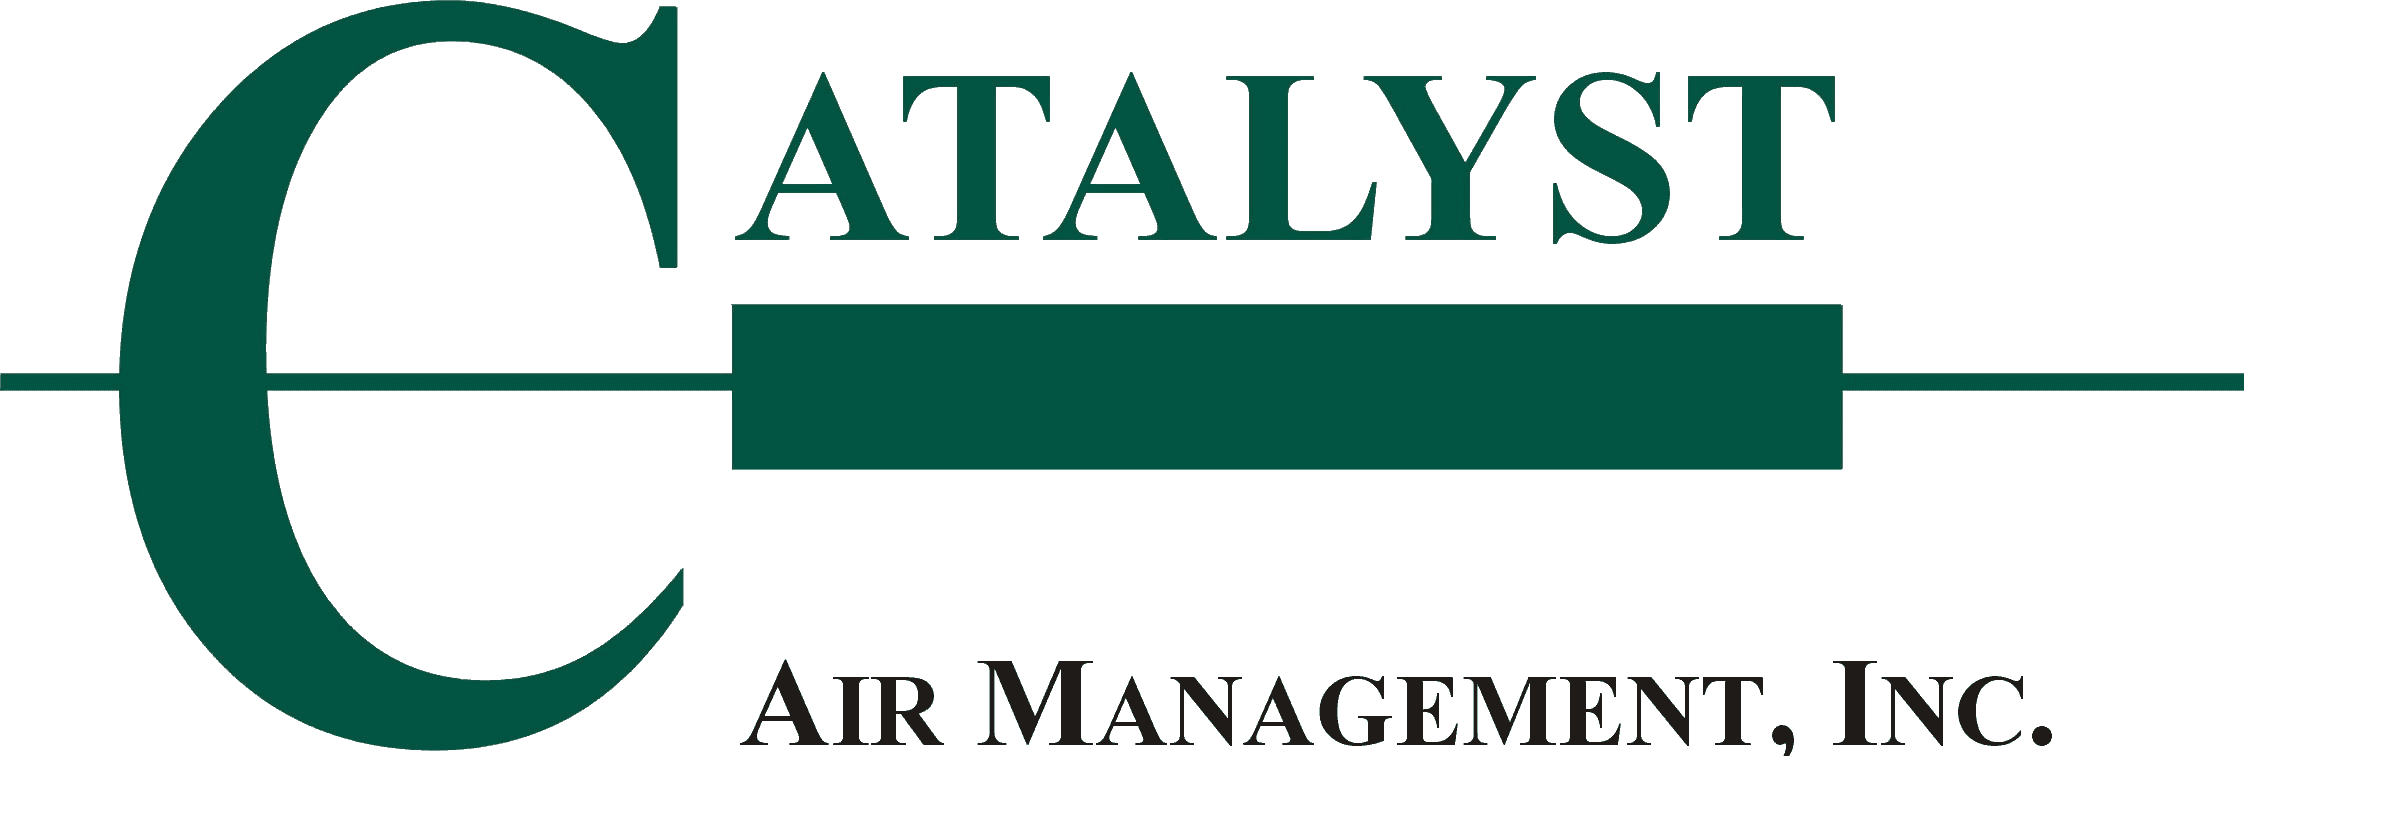 Product Services - Catalyst Air image